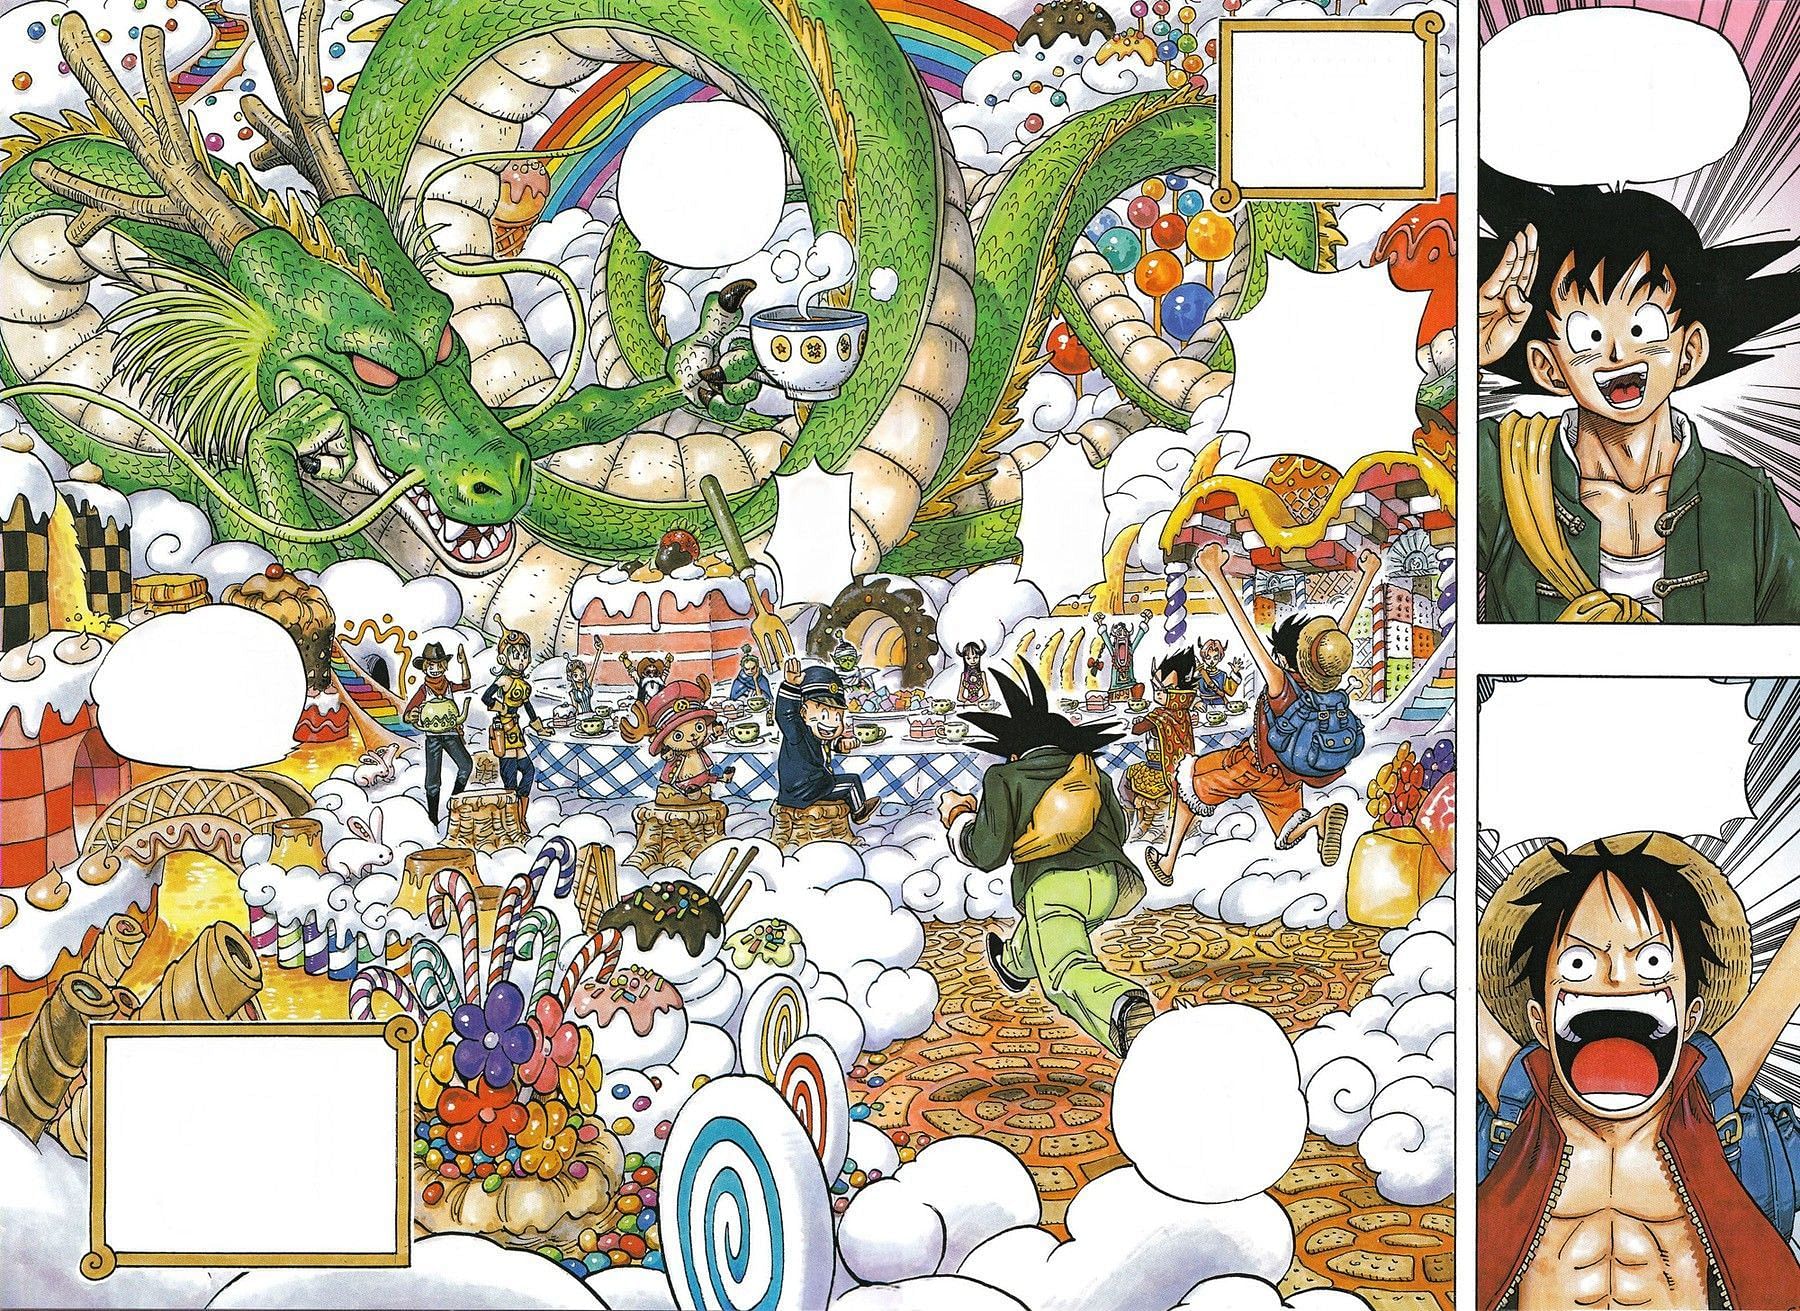 The officially colored One Piece manga is a great way to read the